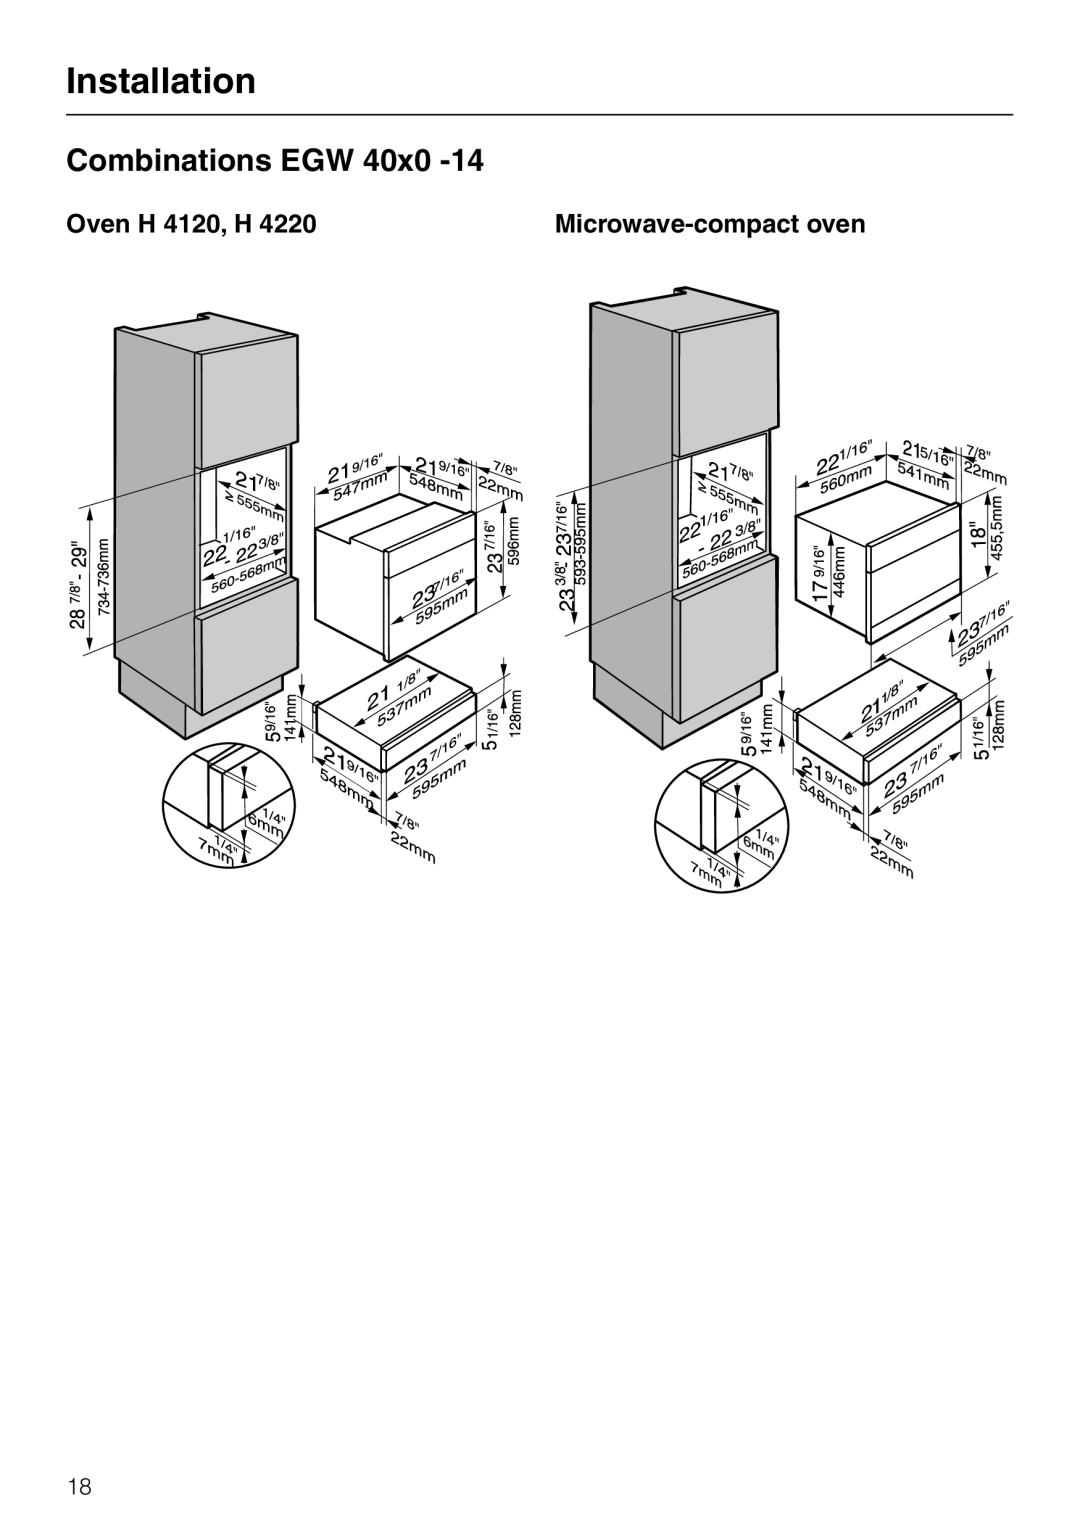 Miele EGW4060-14 operating instructions Combinations EGW, Installation, Oven H 4120, H, Microwave-compactoven 